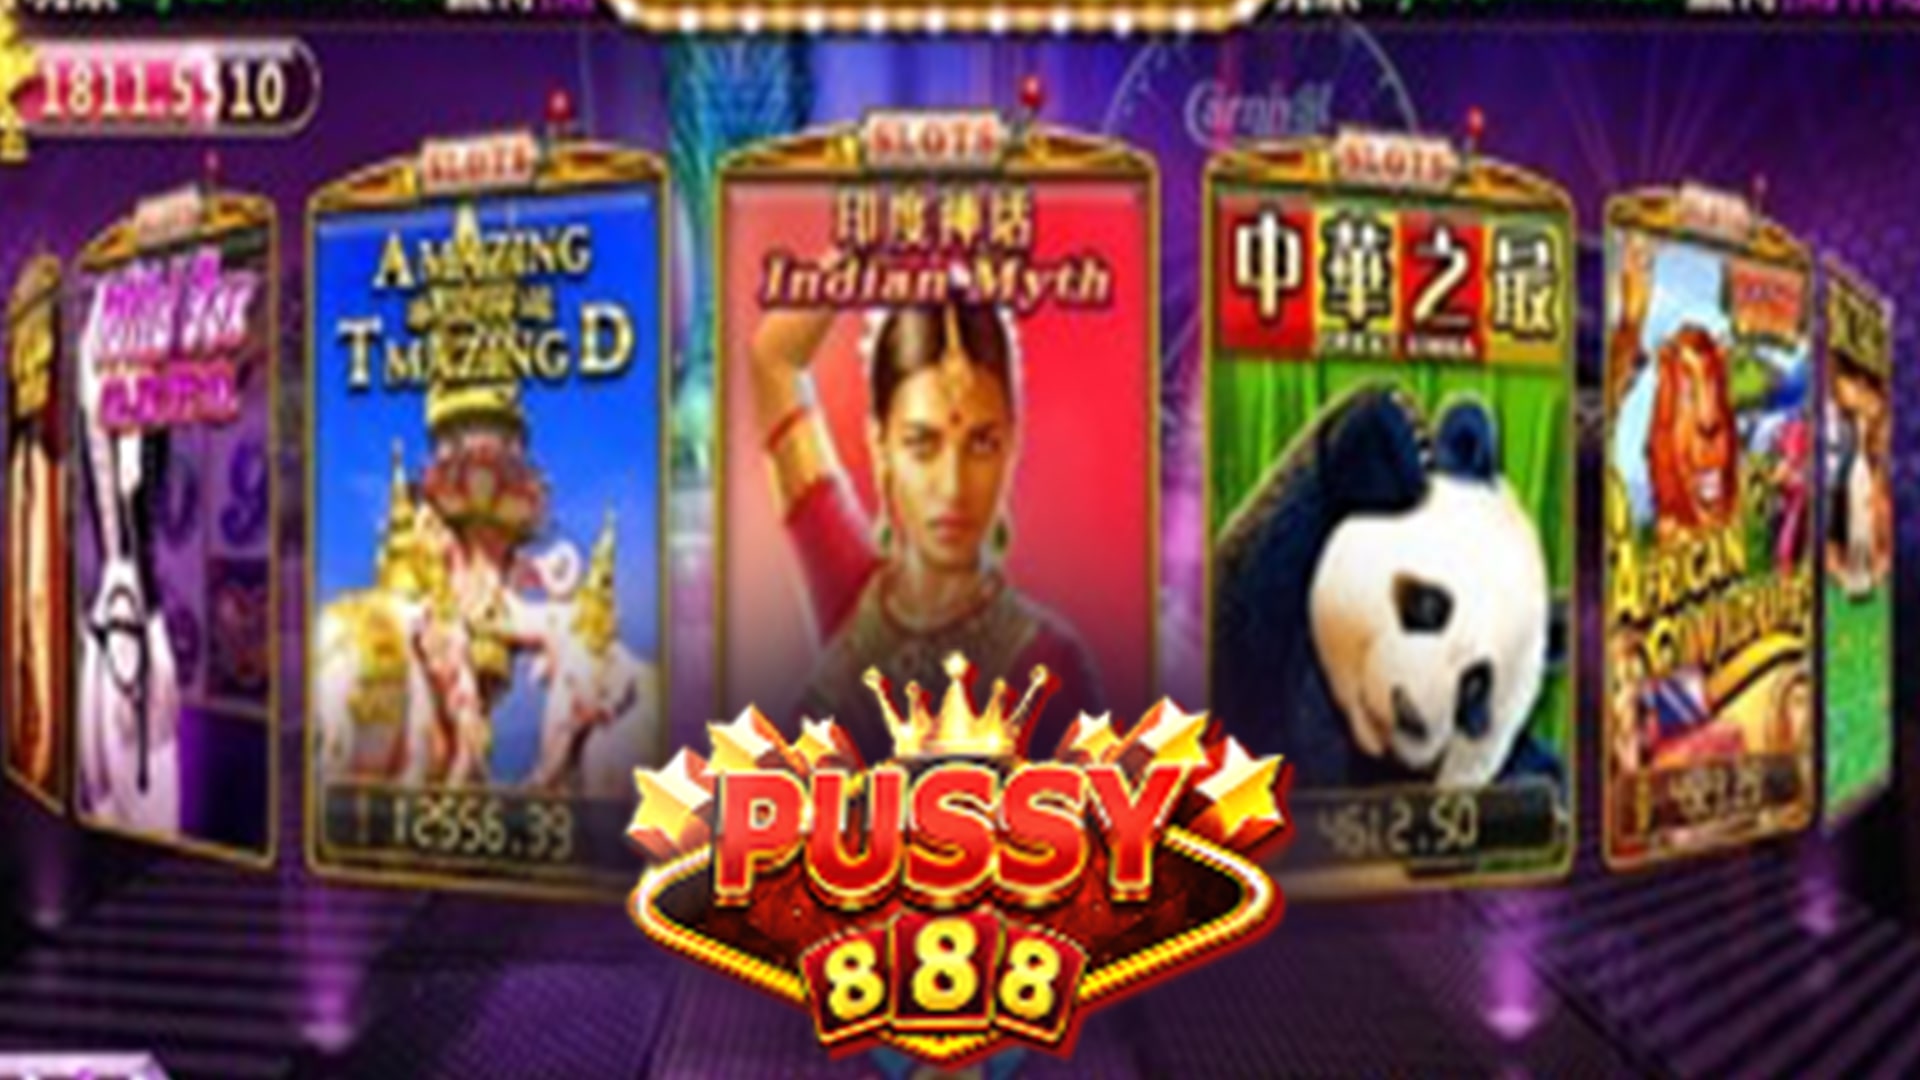 Merely Pussy888 is undoubtedly an choice never to be overlooked.